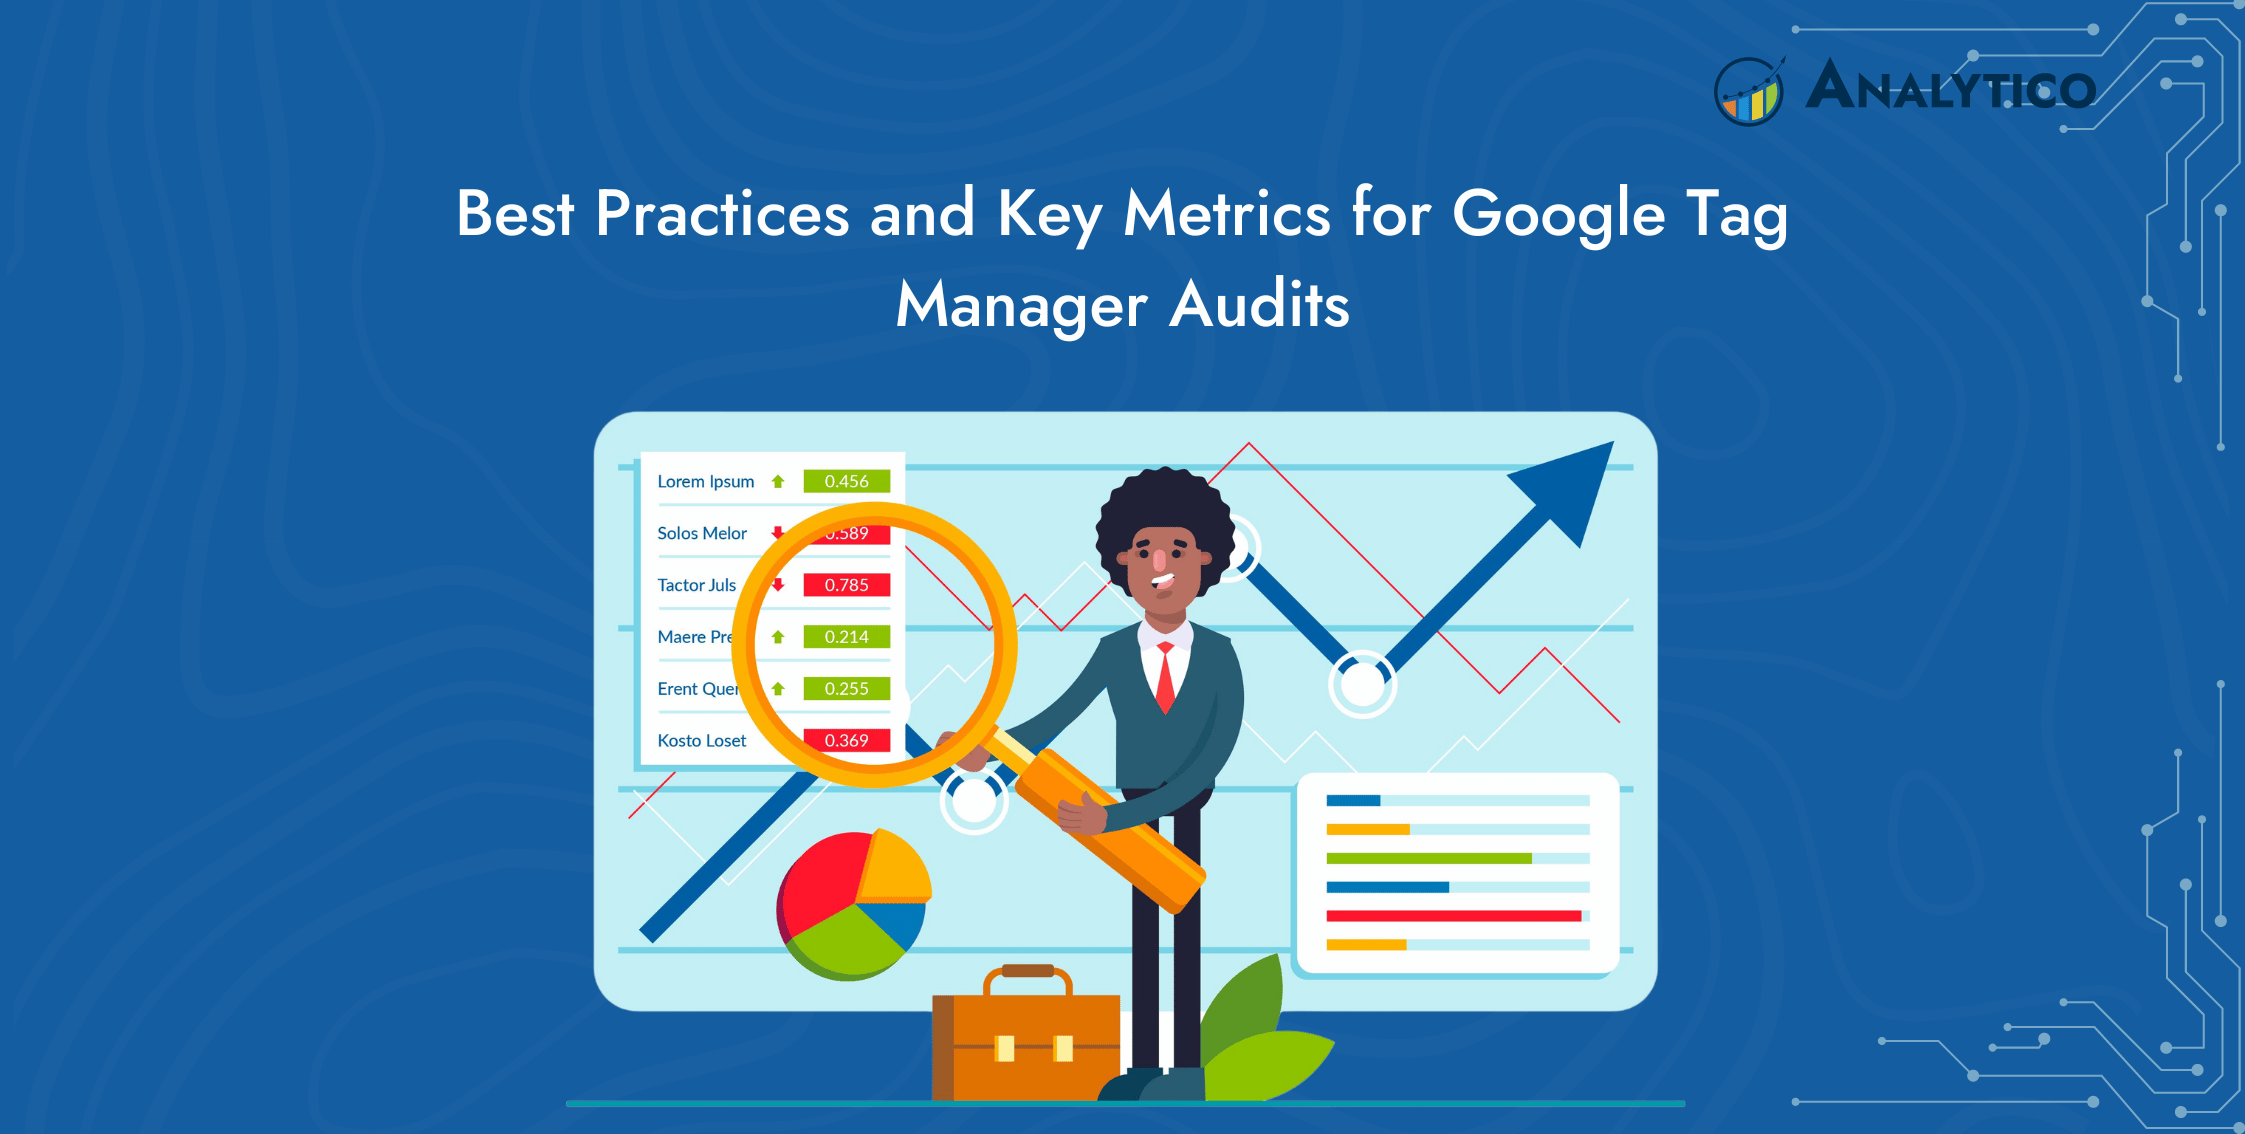 Best Practices and Key Metrics for Google Tag Manager Audits